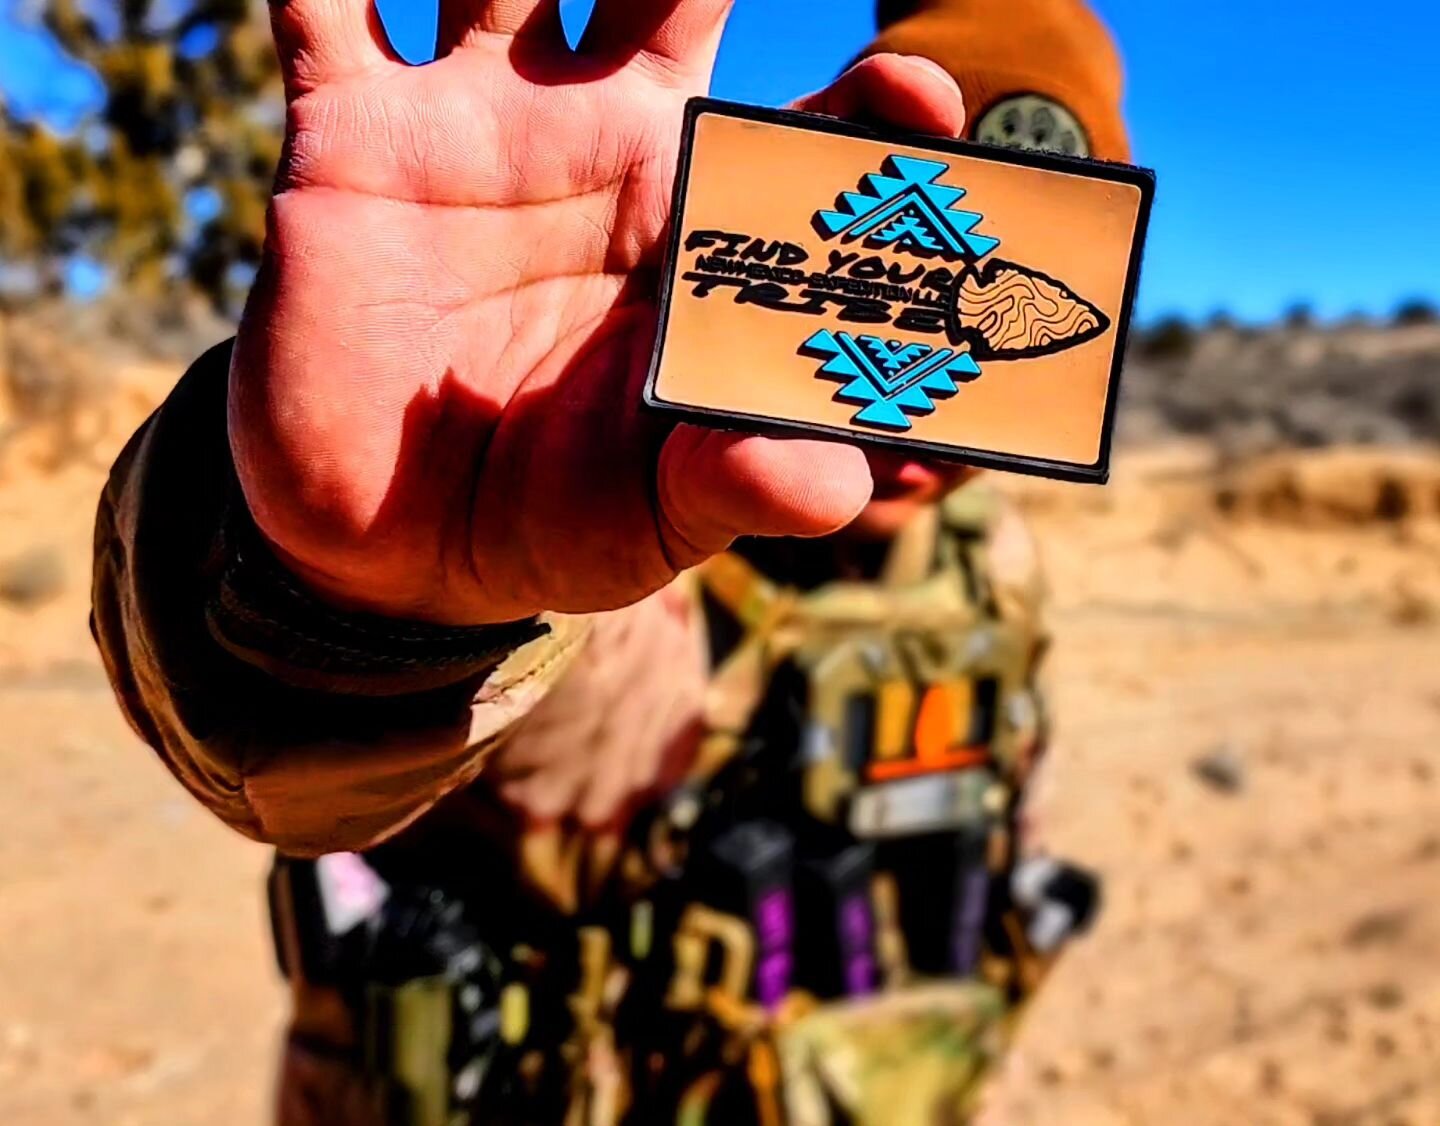 Have you ordered your patch! Link ⬇️✅️

https://www.newmexico-expedition.com/store-1/p/fxjouiro0q2cd08e6fwjp03r0wuoji